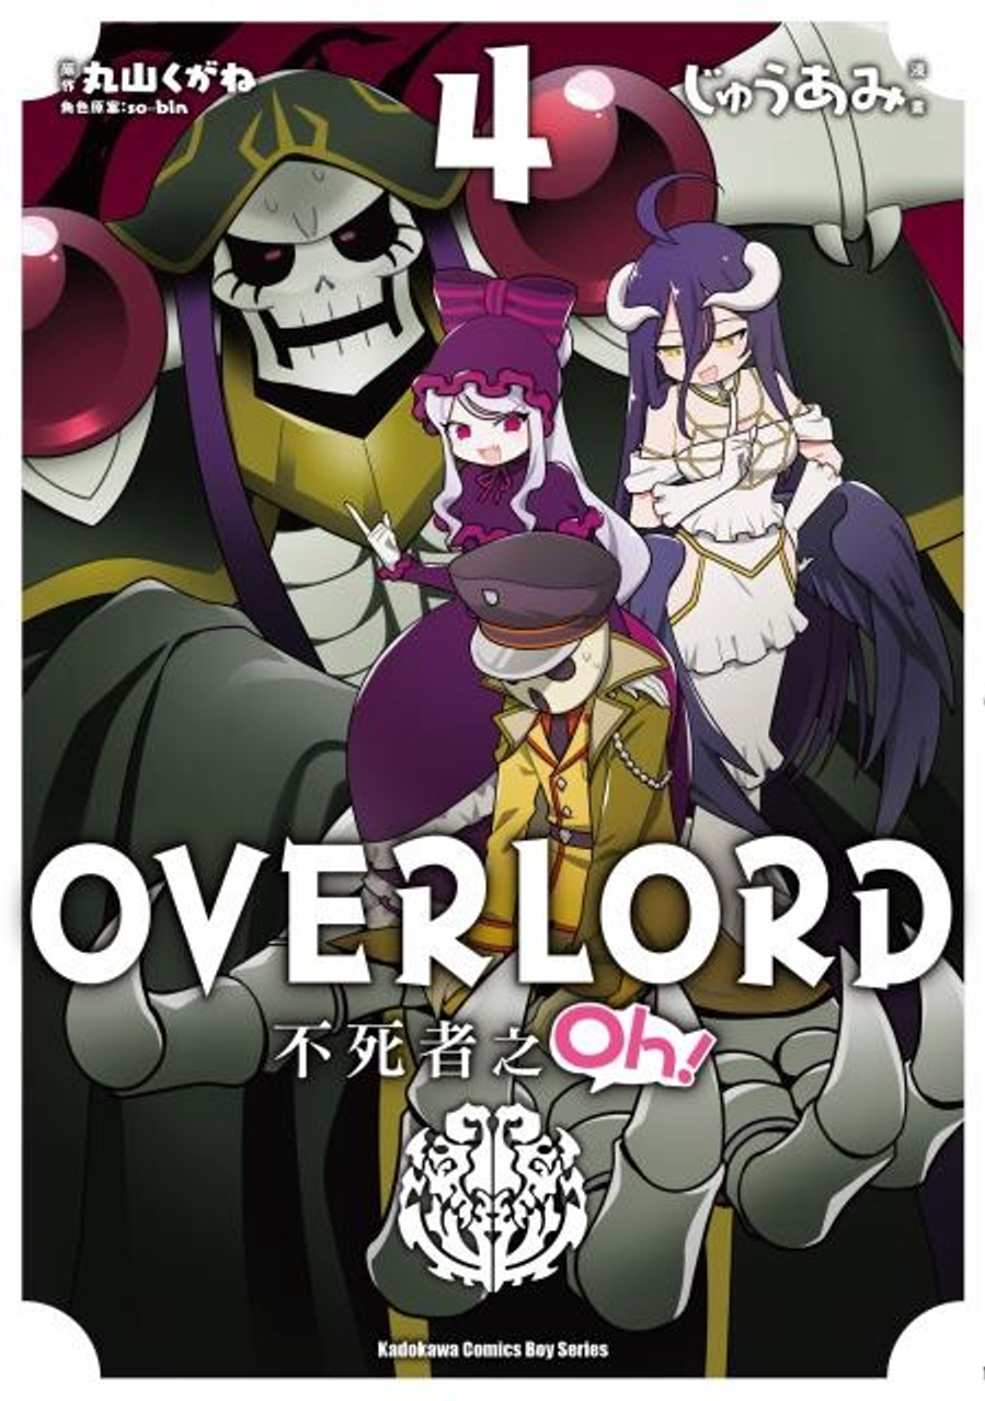 OVERLORD 不死者之Oh! (4)